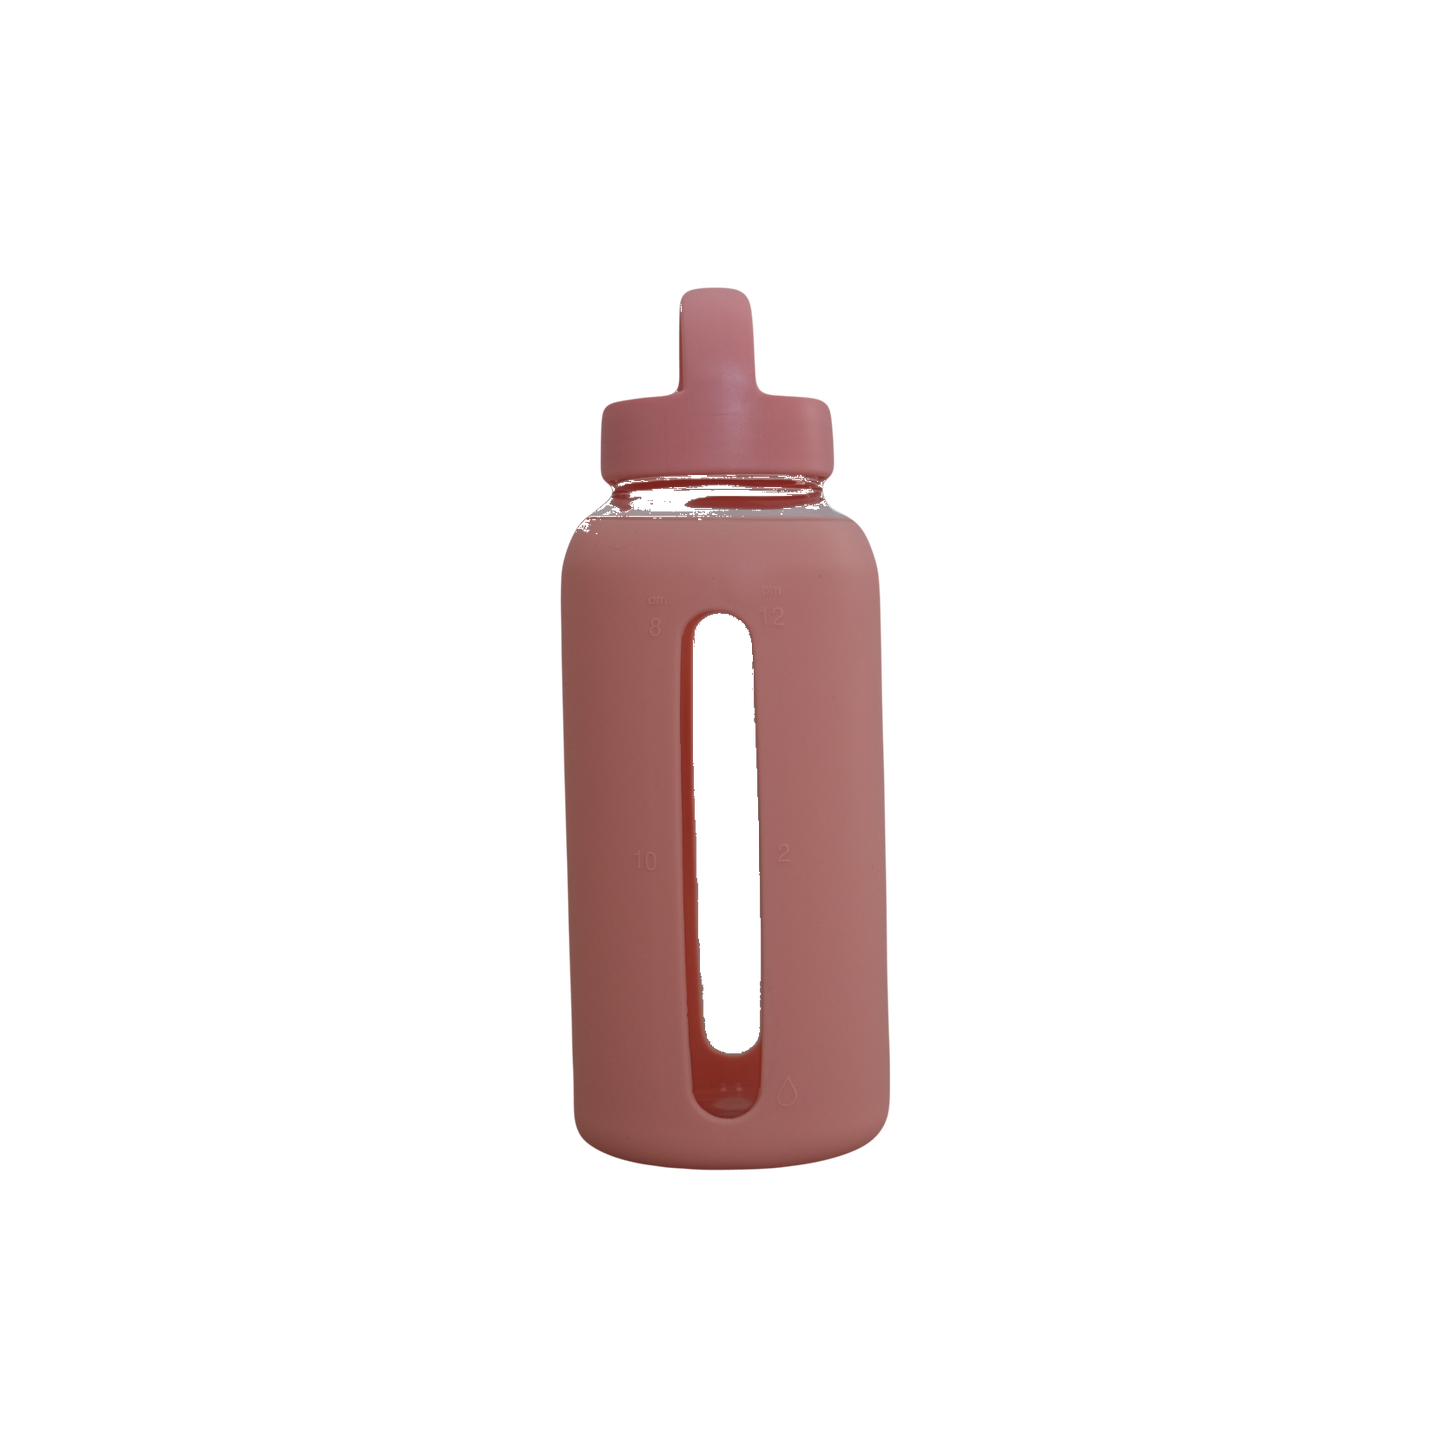 The Hydration bottle - Dusty Ros